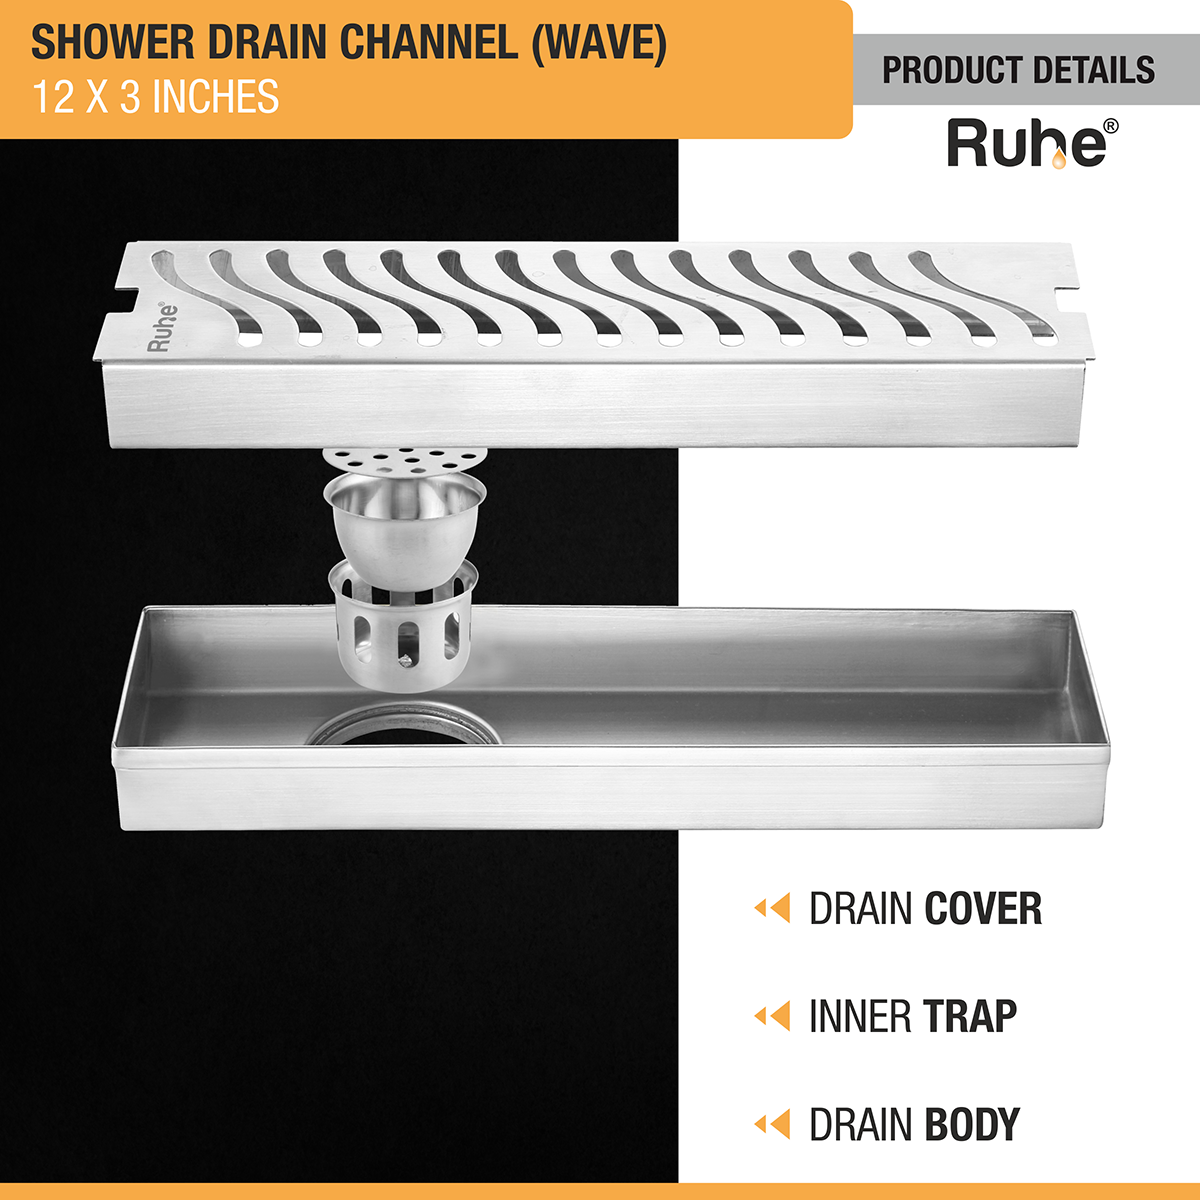 Wave Shower Drain Channel (12 X 3 Inches) with Cockroach Trap (304 Grade) product details